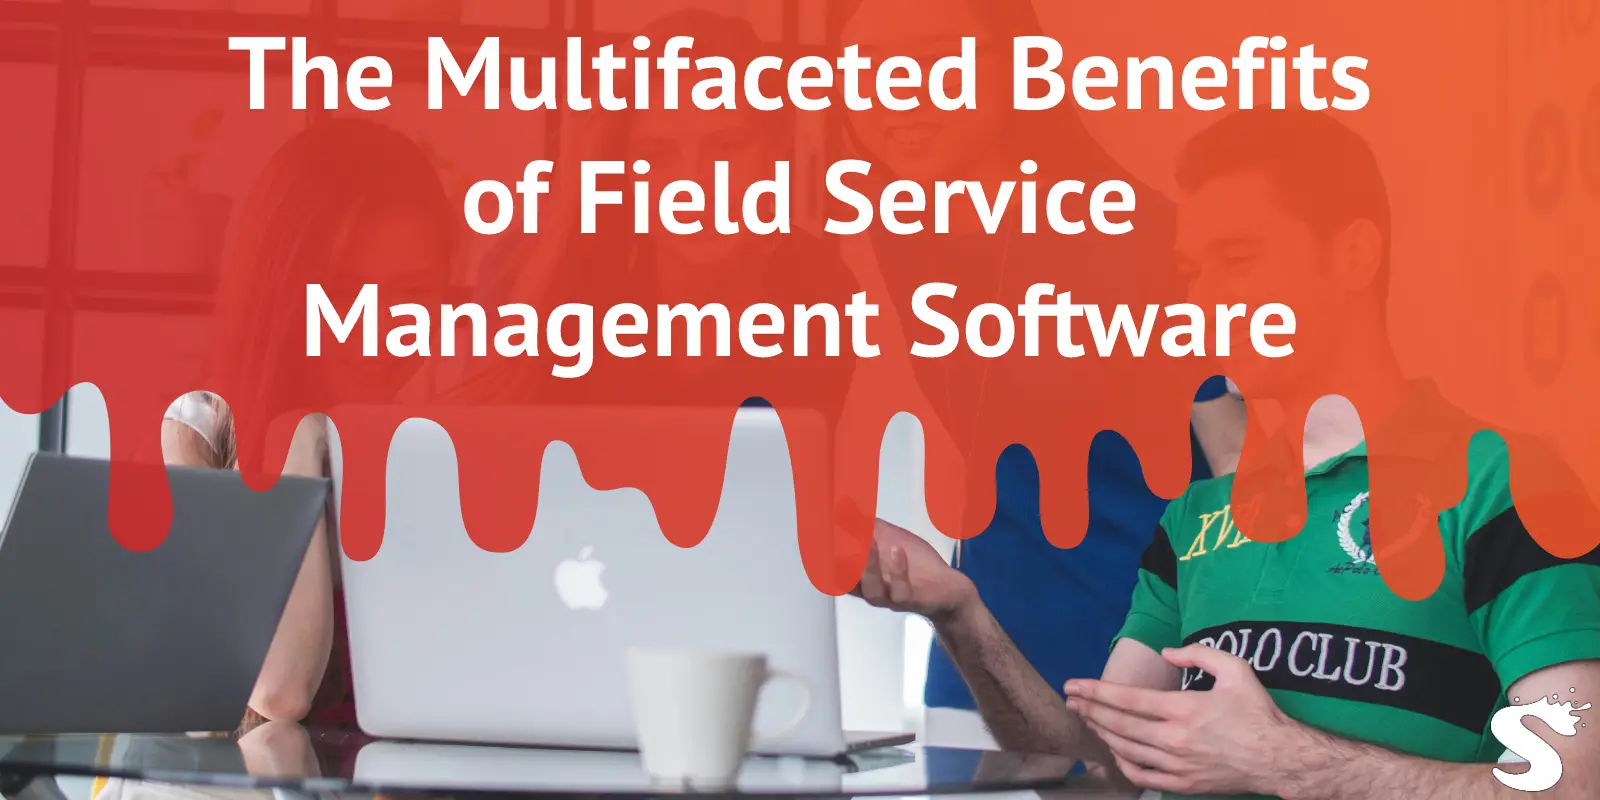 The Multifaceted Benefits of Field Service Management Software